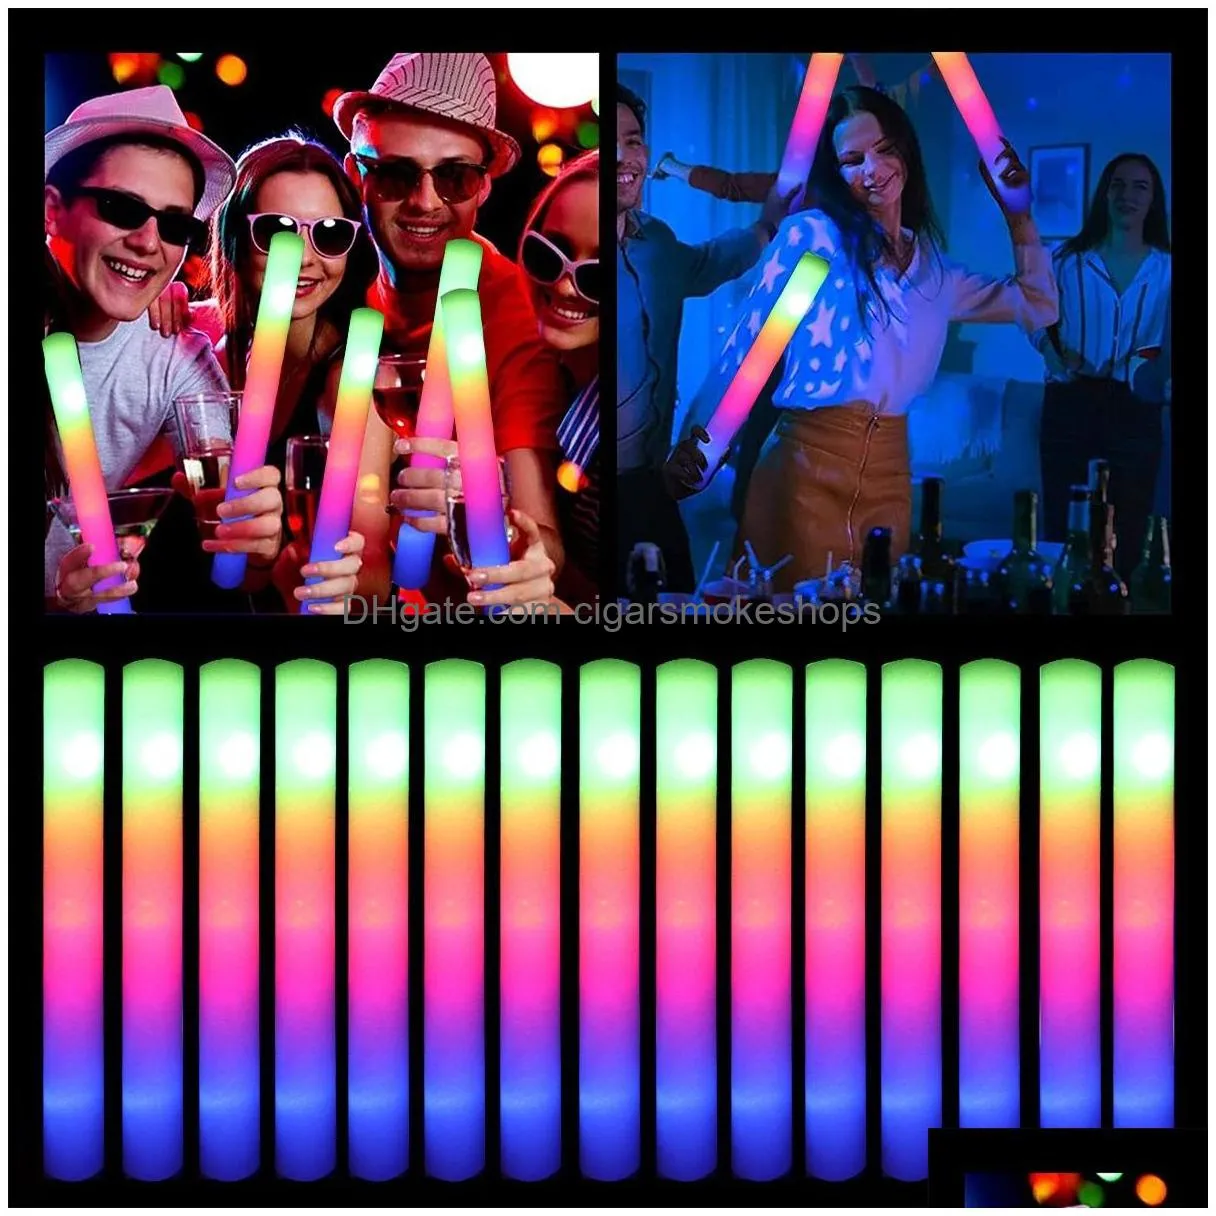 Other Event & Party Supplies Rgb Led Foam Stick Cheer Tube Colorf Light Glow In The Dark Birthday Wedding Festival Decorations Drop De Dhrf6